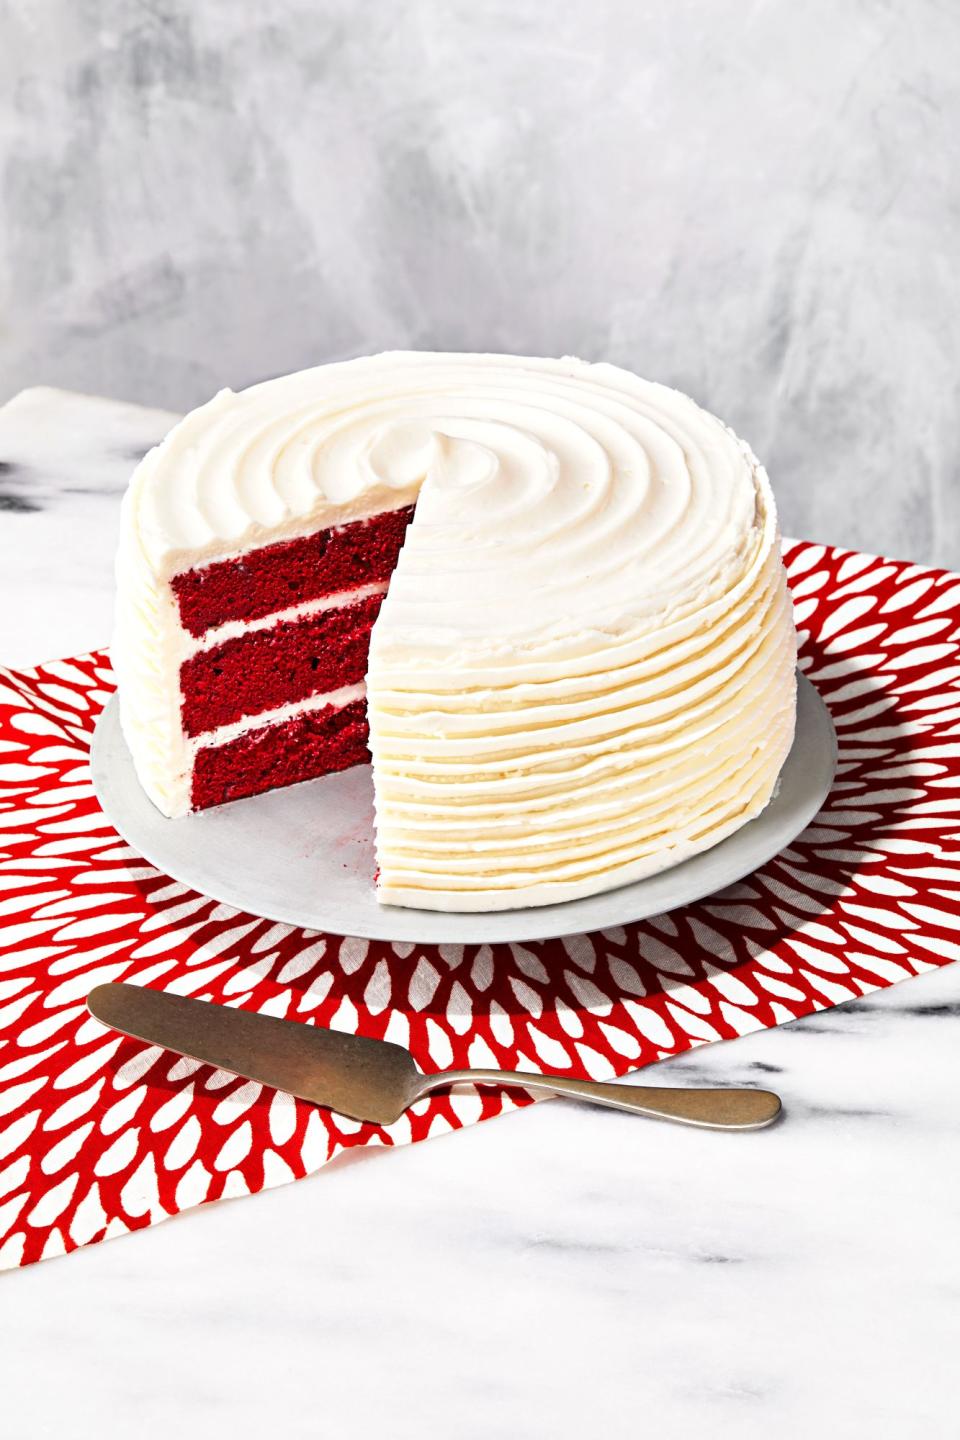 Red Velvet Cake with White Chocolate-Cream Cheese Frosting